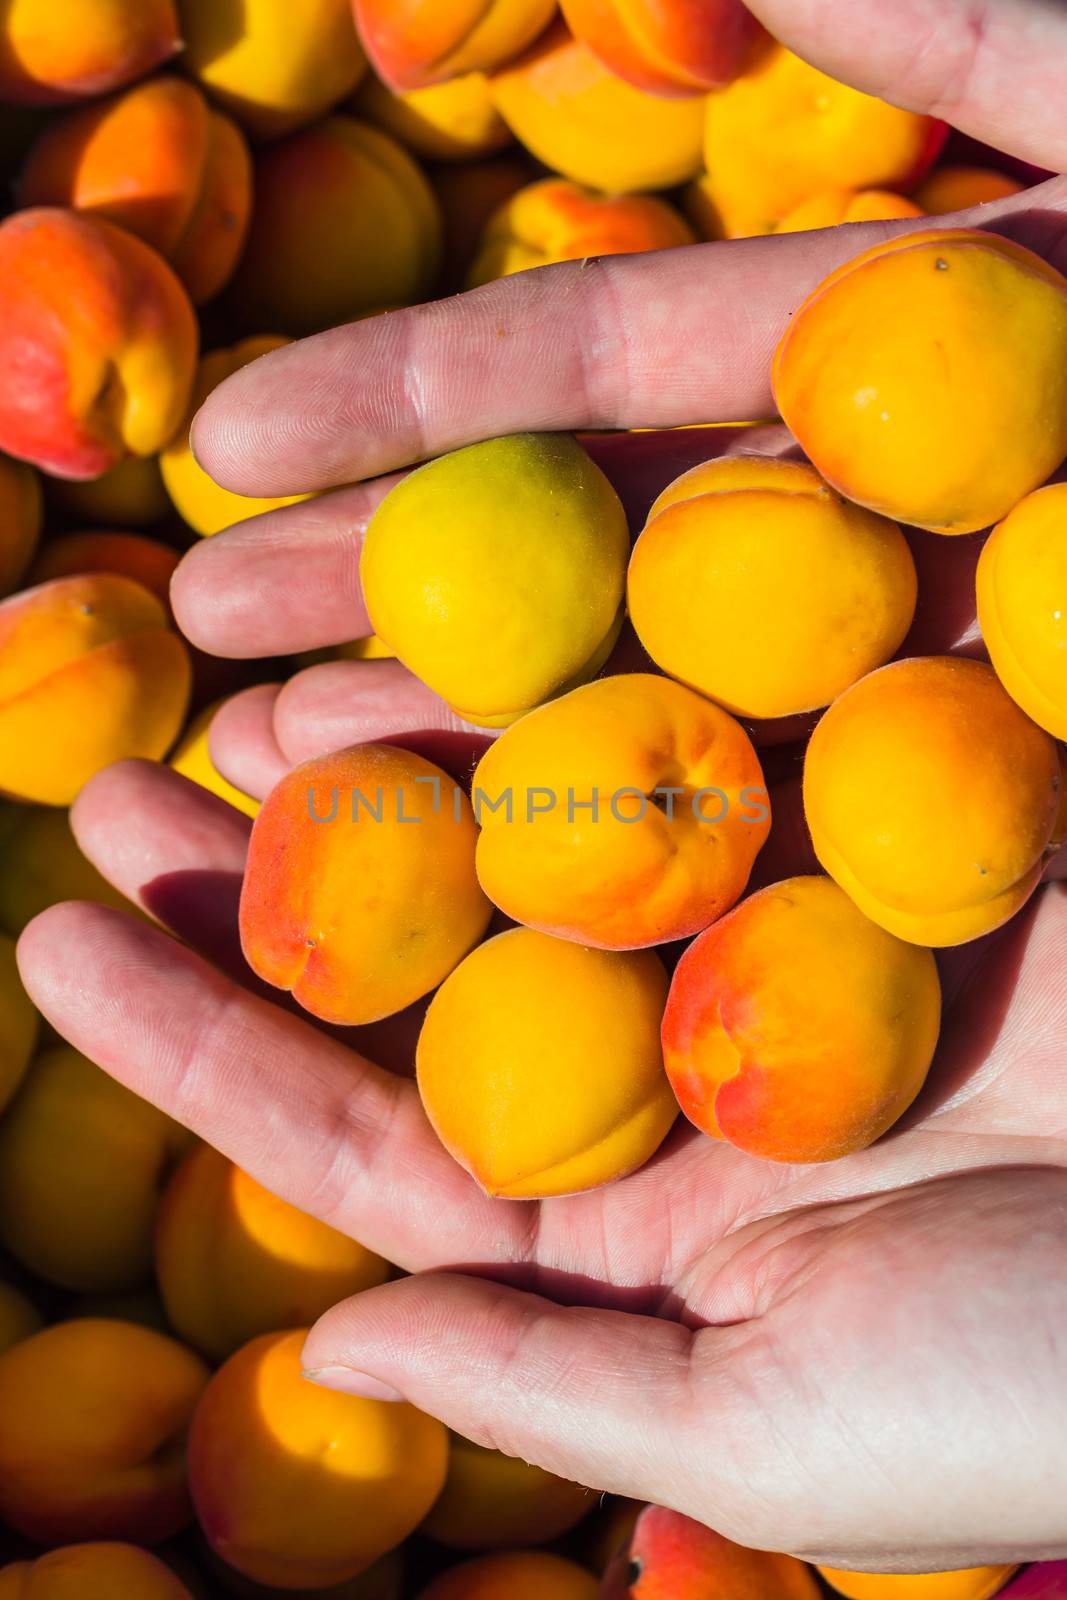 The long ripe apricot has hung all over the branch, is also an abundant harvest season